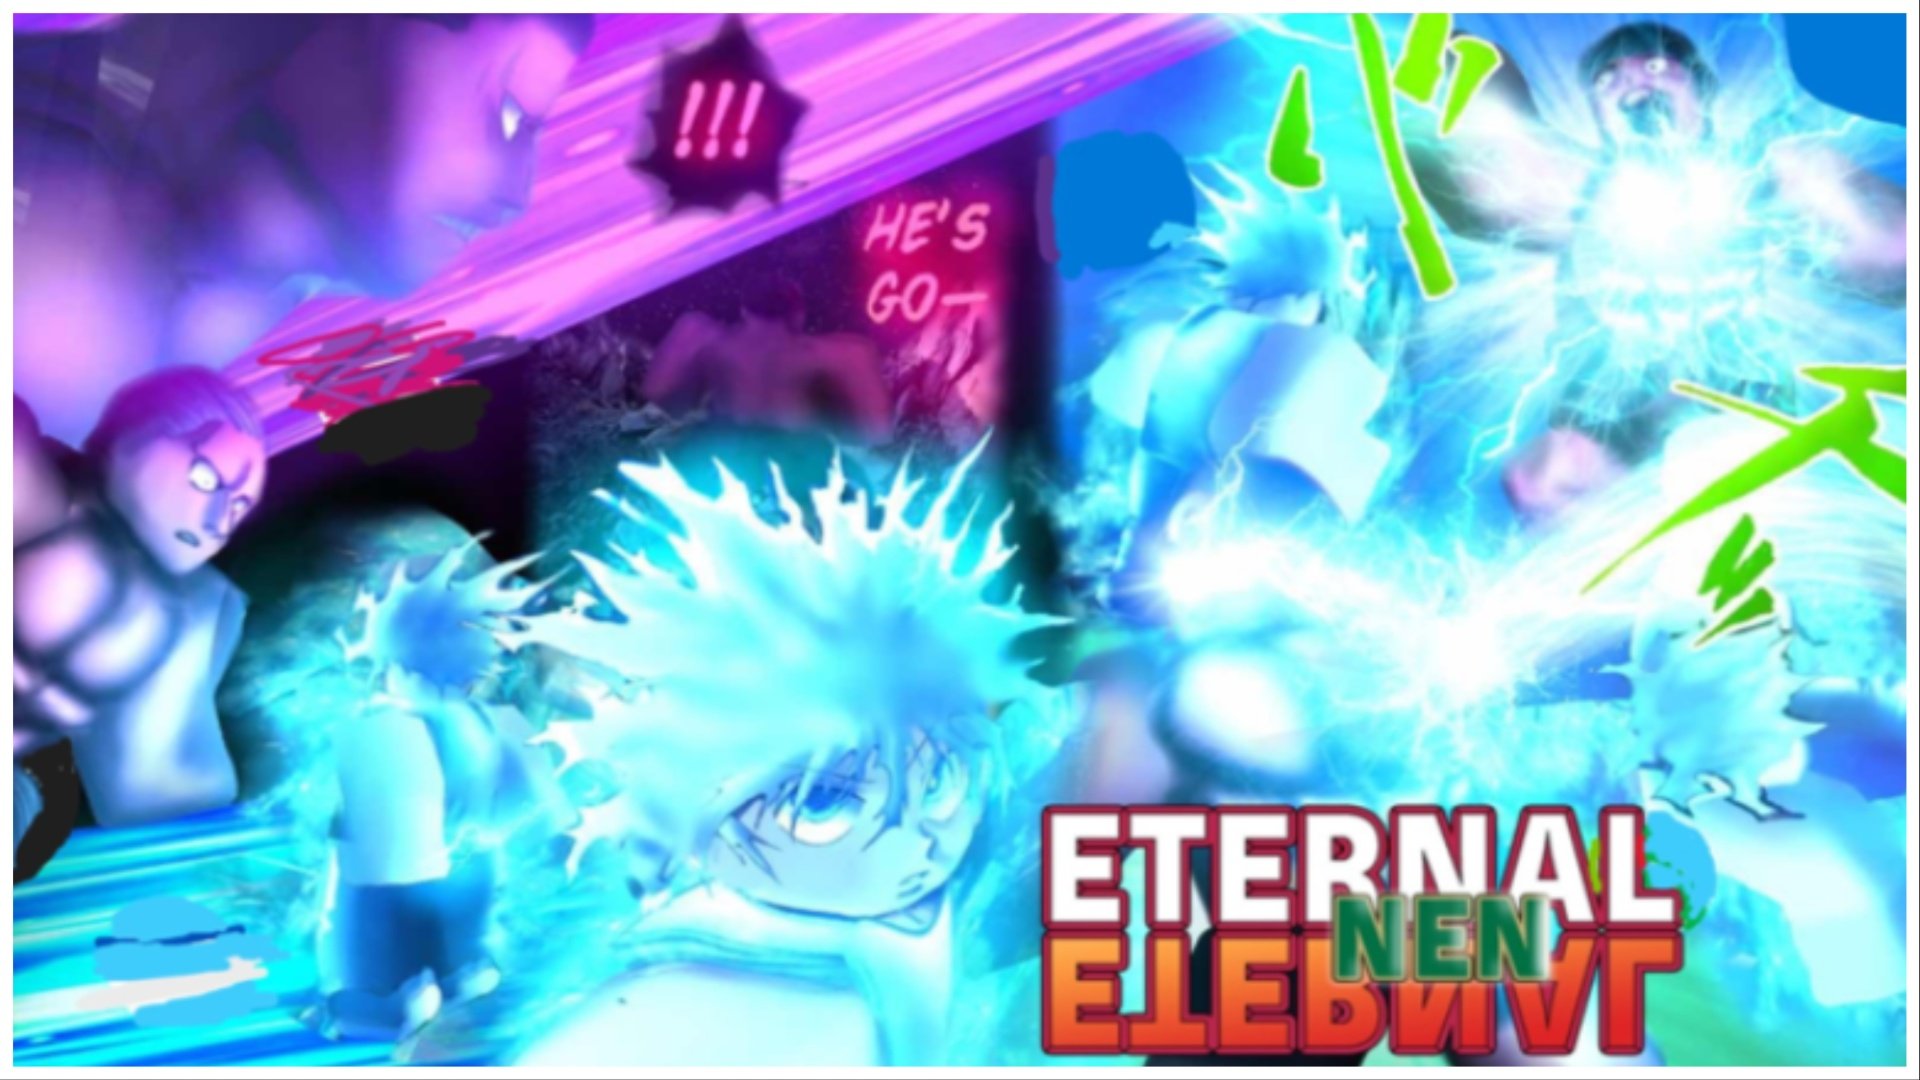 The image shows a roblox styled killua with blue nen interacting in different scenes. The eternal nen game logo copies the hunter x hunter style and is in the bottom right